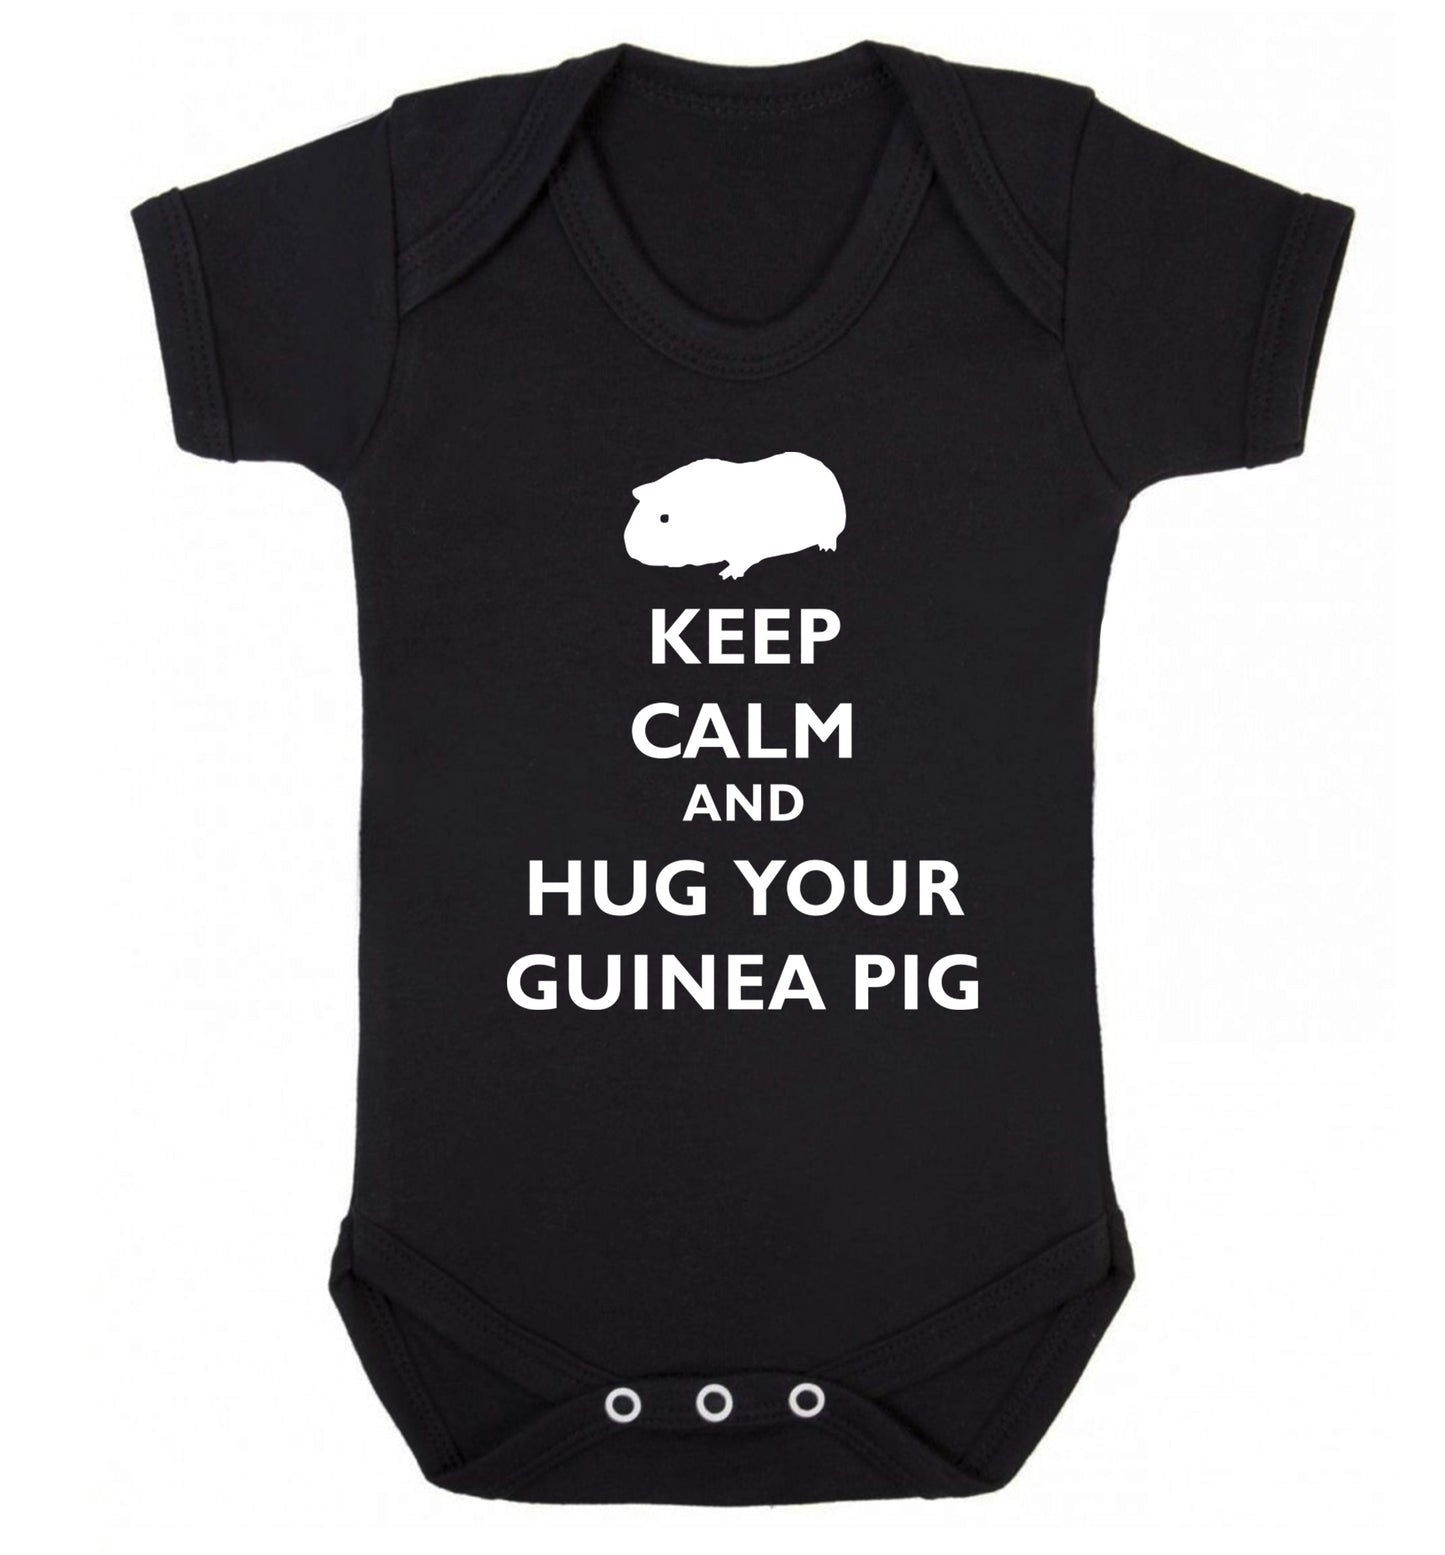 Keep calm and hug your guineapig Baby Vest black 18-24 months